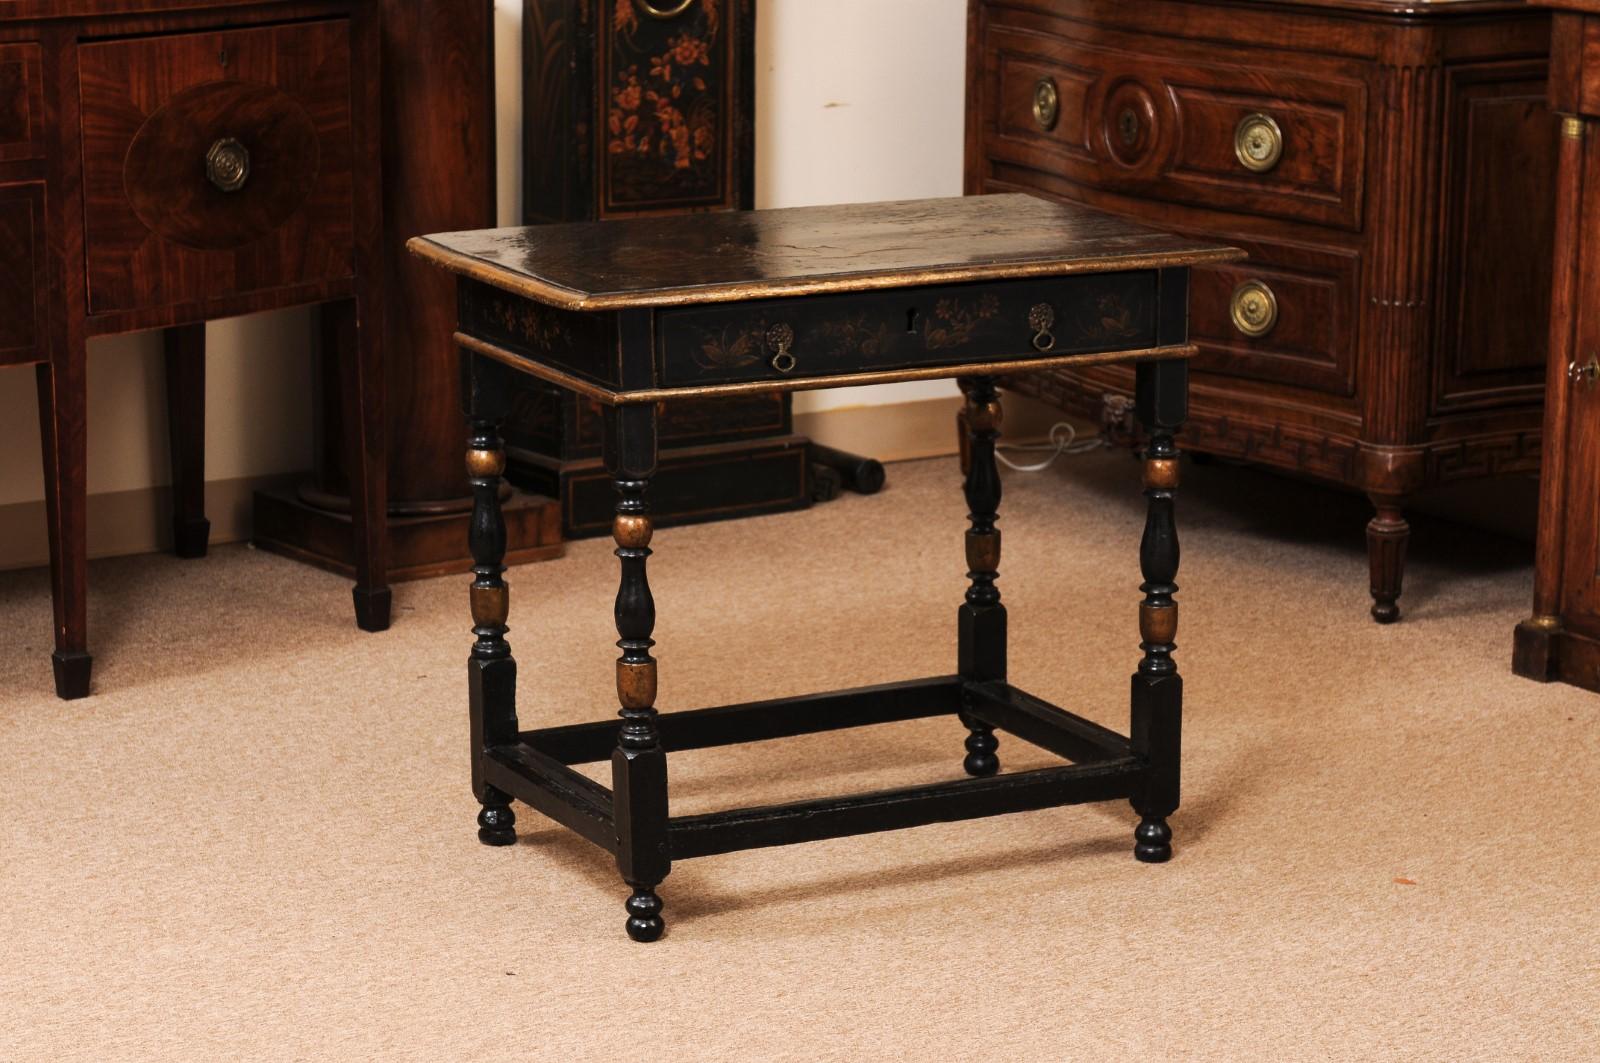 18th Century English Chinoiserie Decorated Side Table with Drawer, Turned Legs & Box Form Stretcher